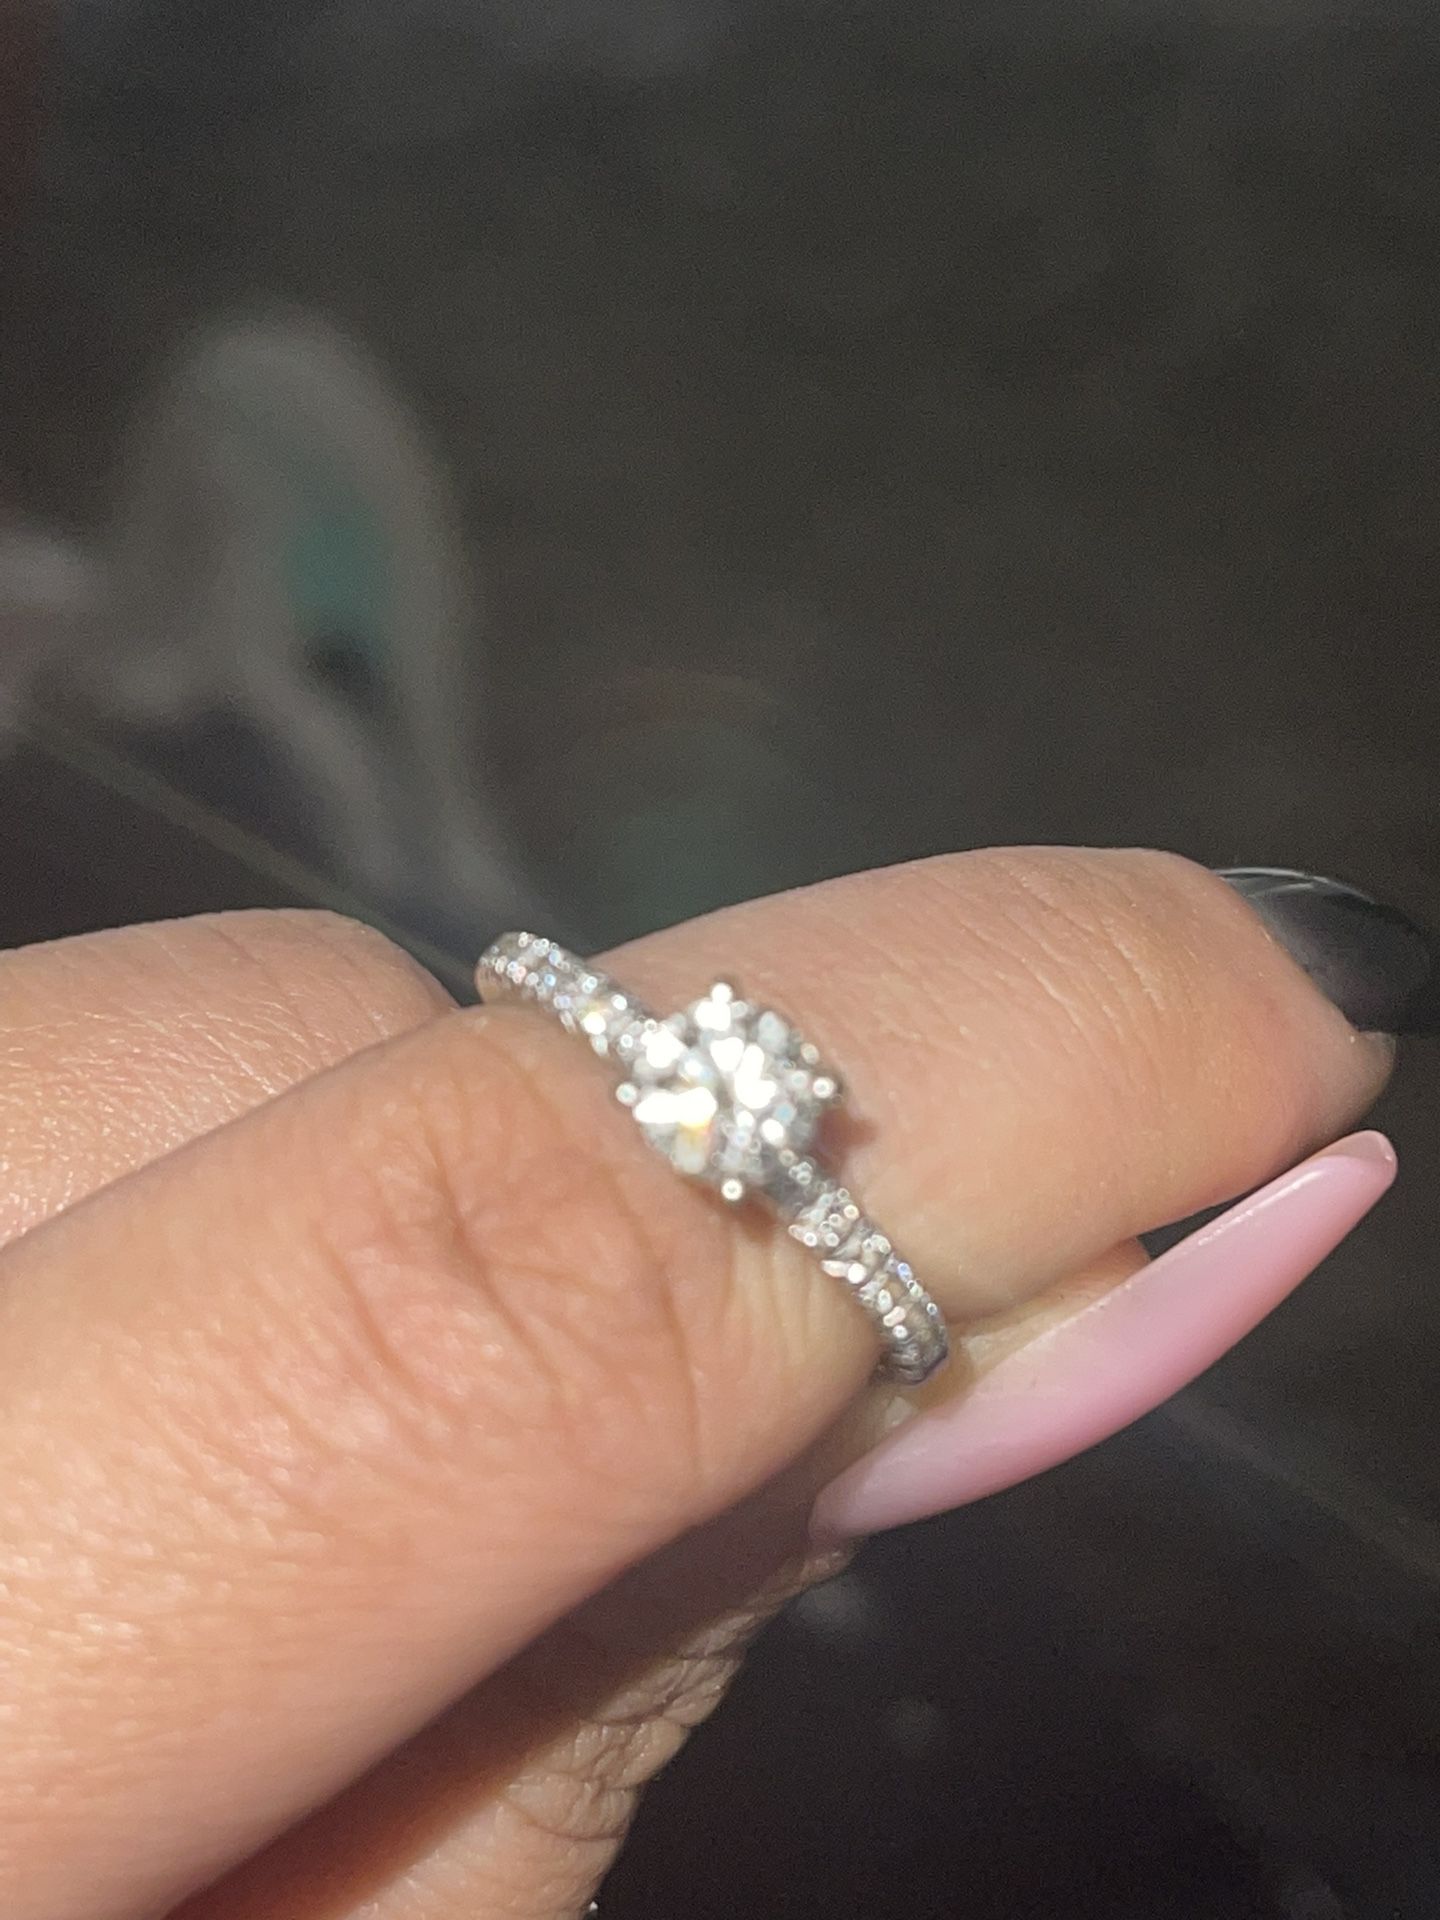 1ct Diamond Engagement Ring Price Not Negotiable SERIOUS INQUIRES ONLY.